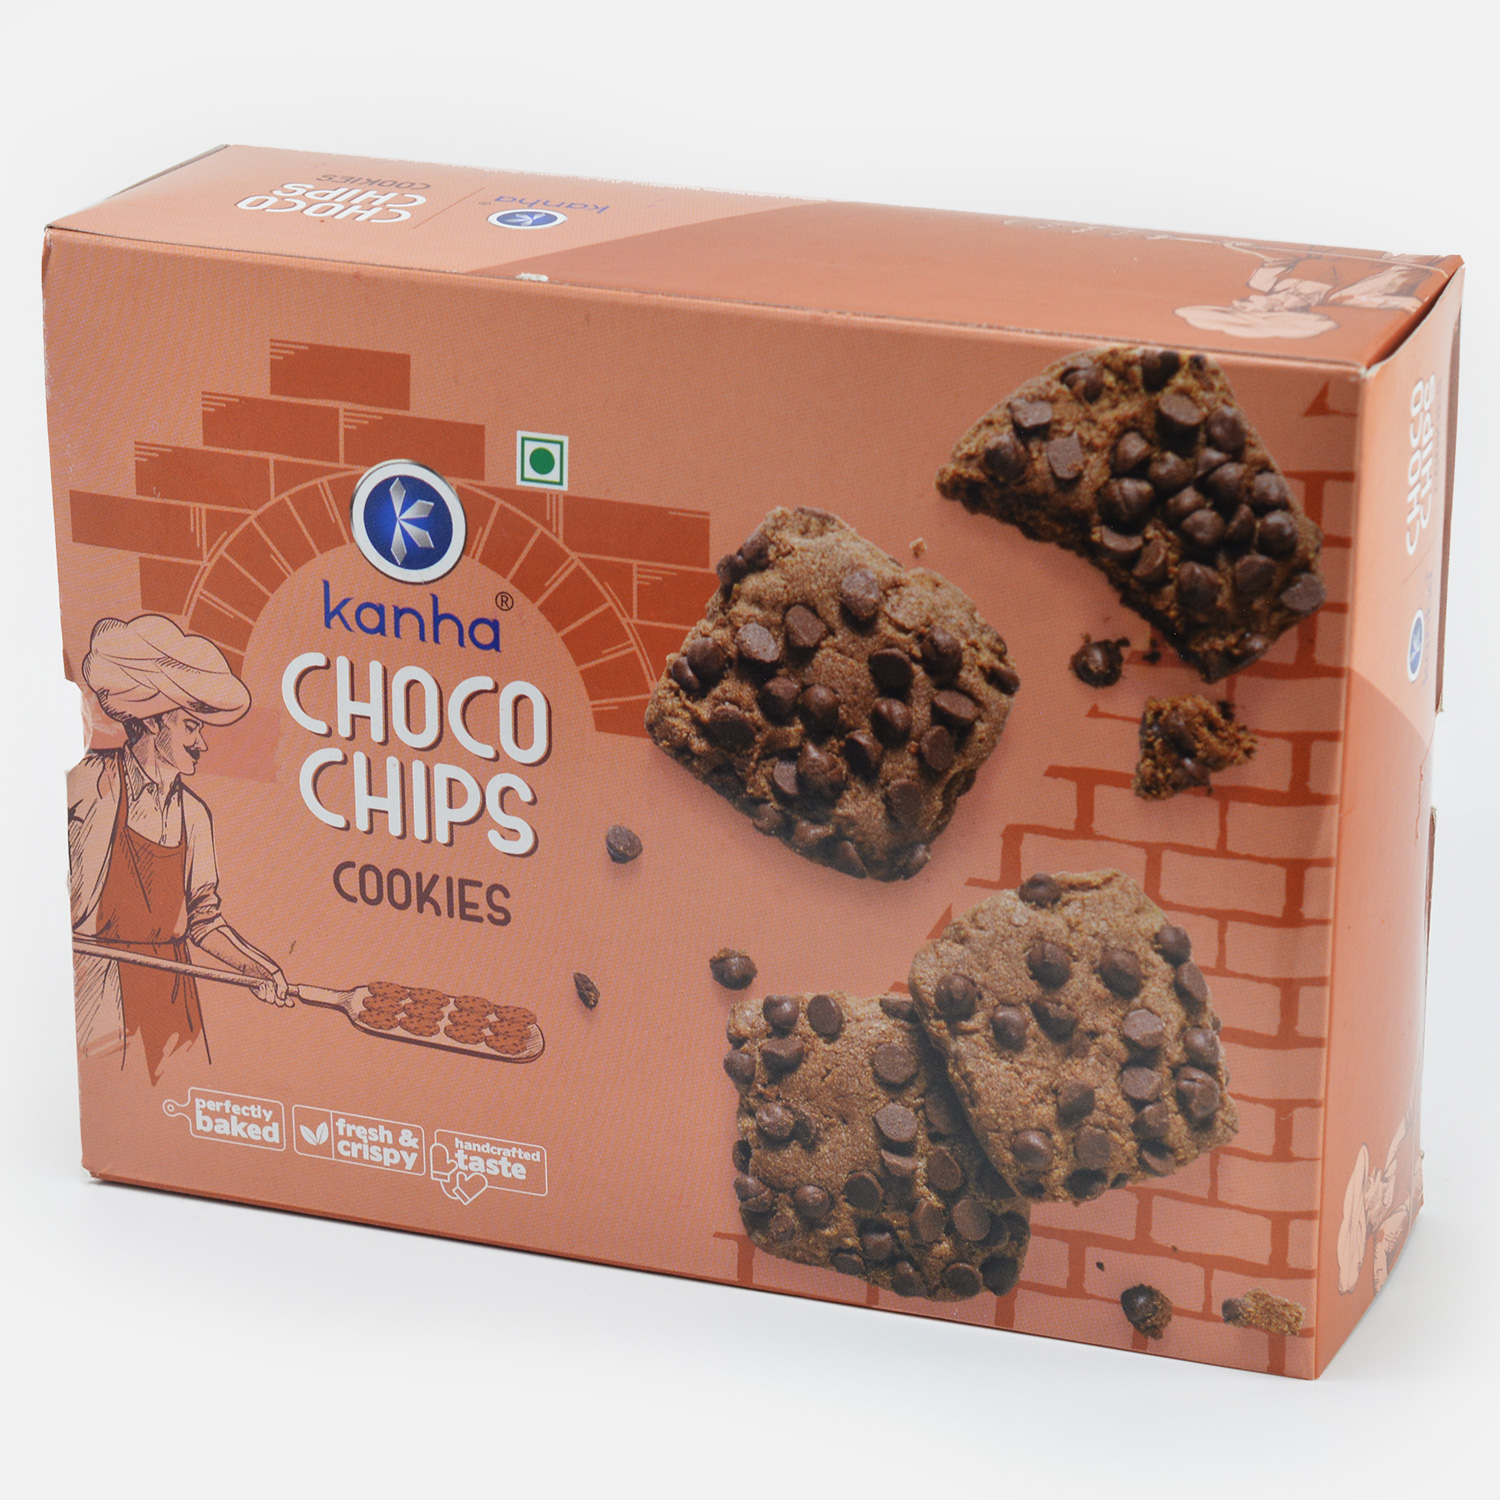 Branded Choco Chips Cookies By Kanha